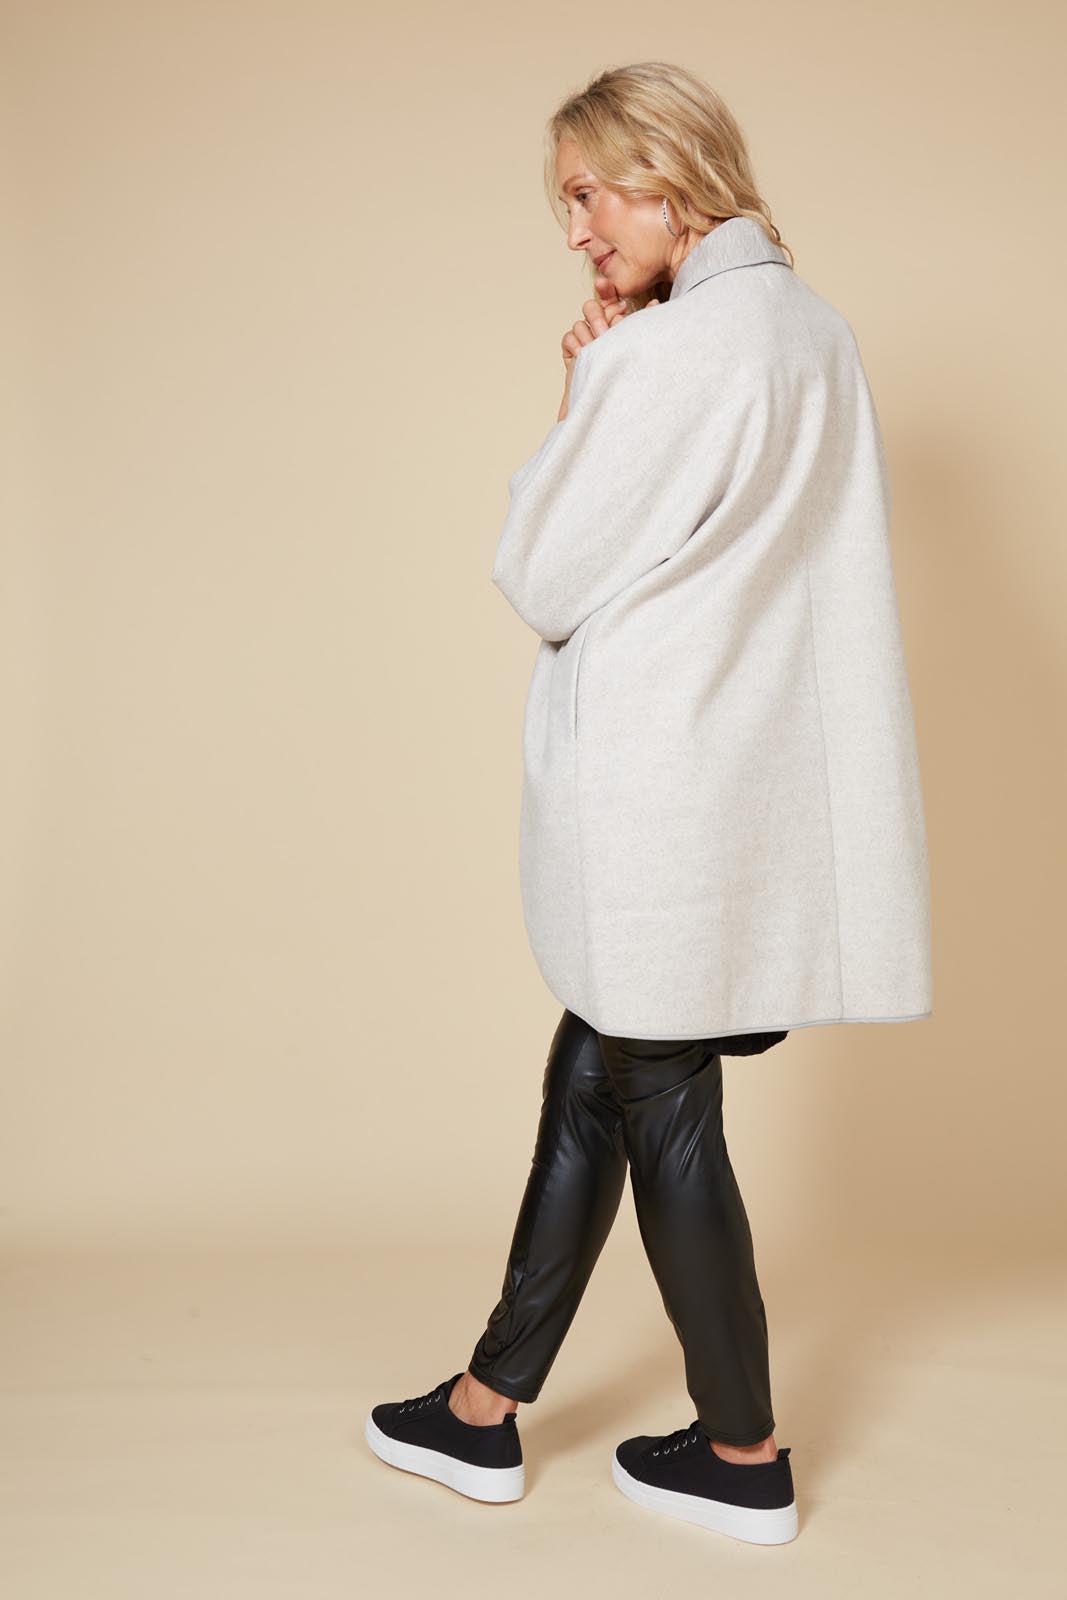 Klein Wrap Jacket - Gray-Jackets, Coats & Vests-Eb & Ive-The Bay Room